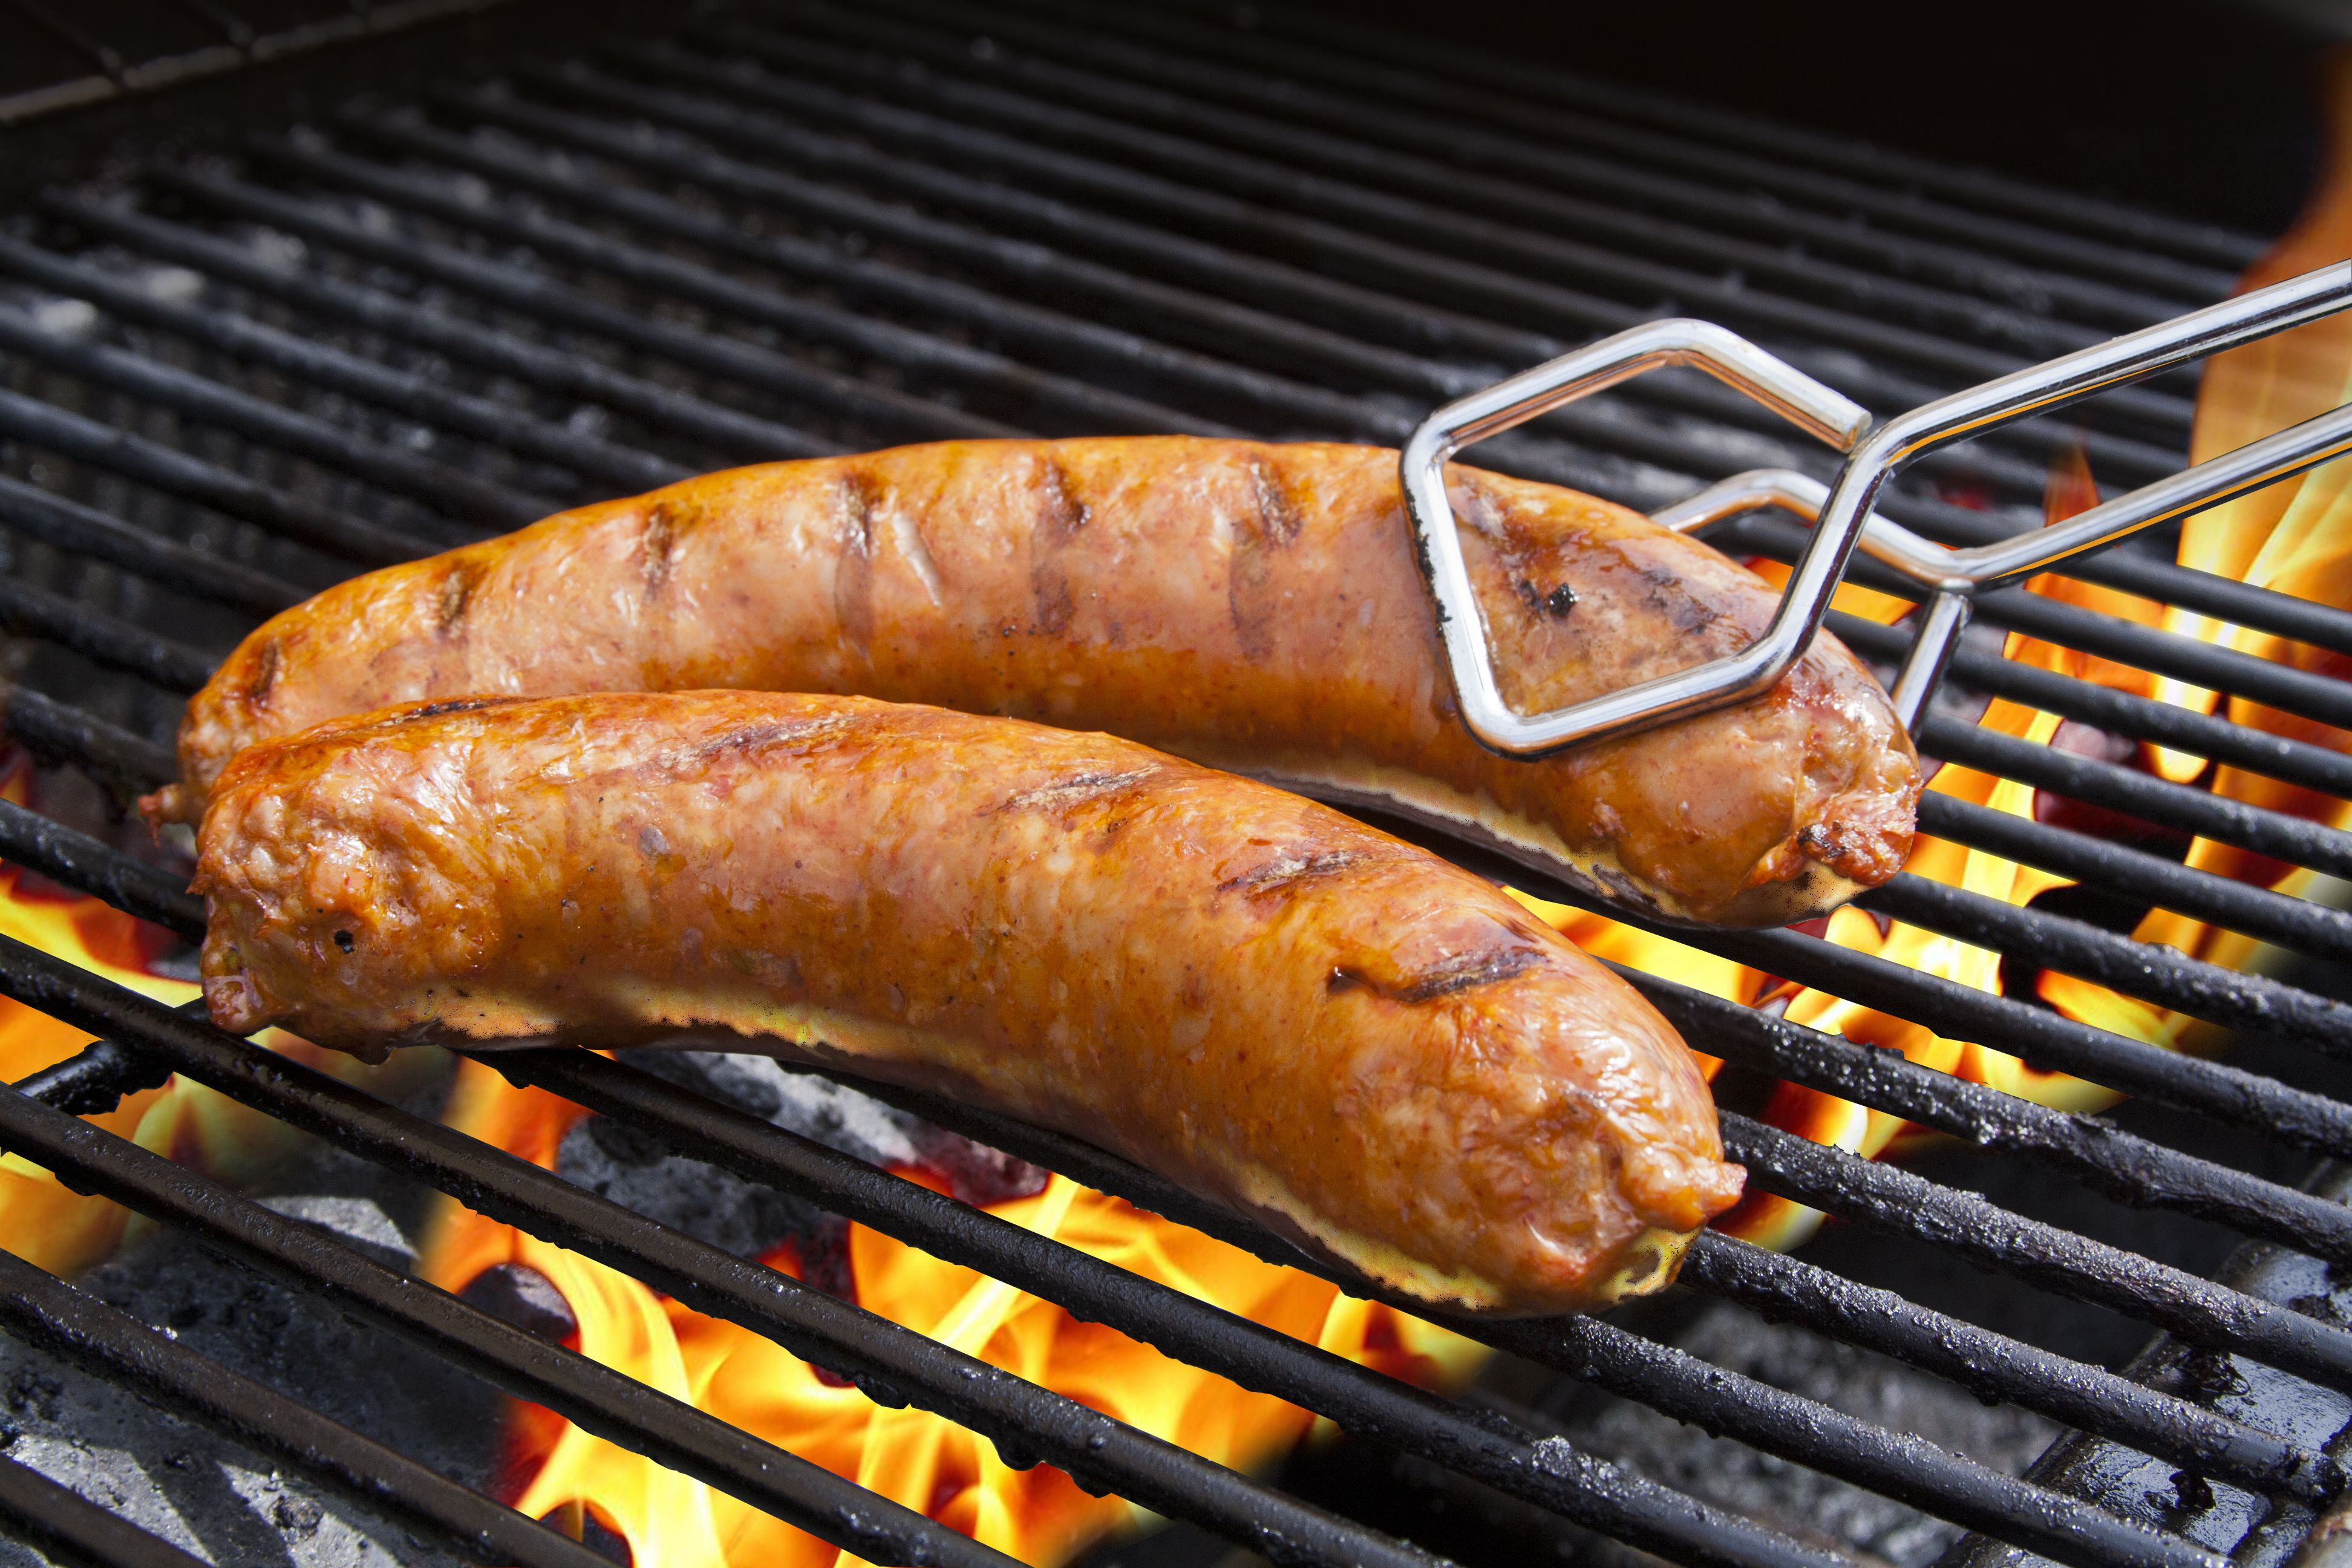 grilled sausage links | Bar B Que & Grillin Out Recipes | Pinterest ...